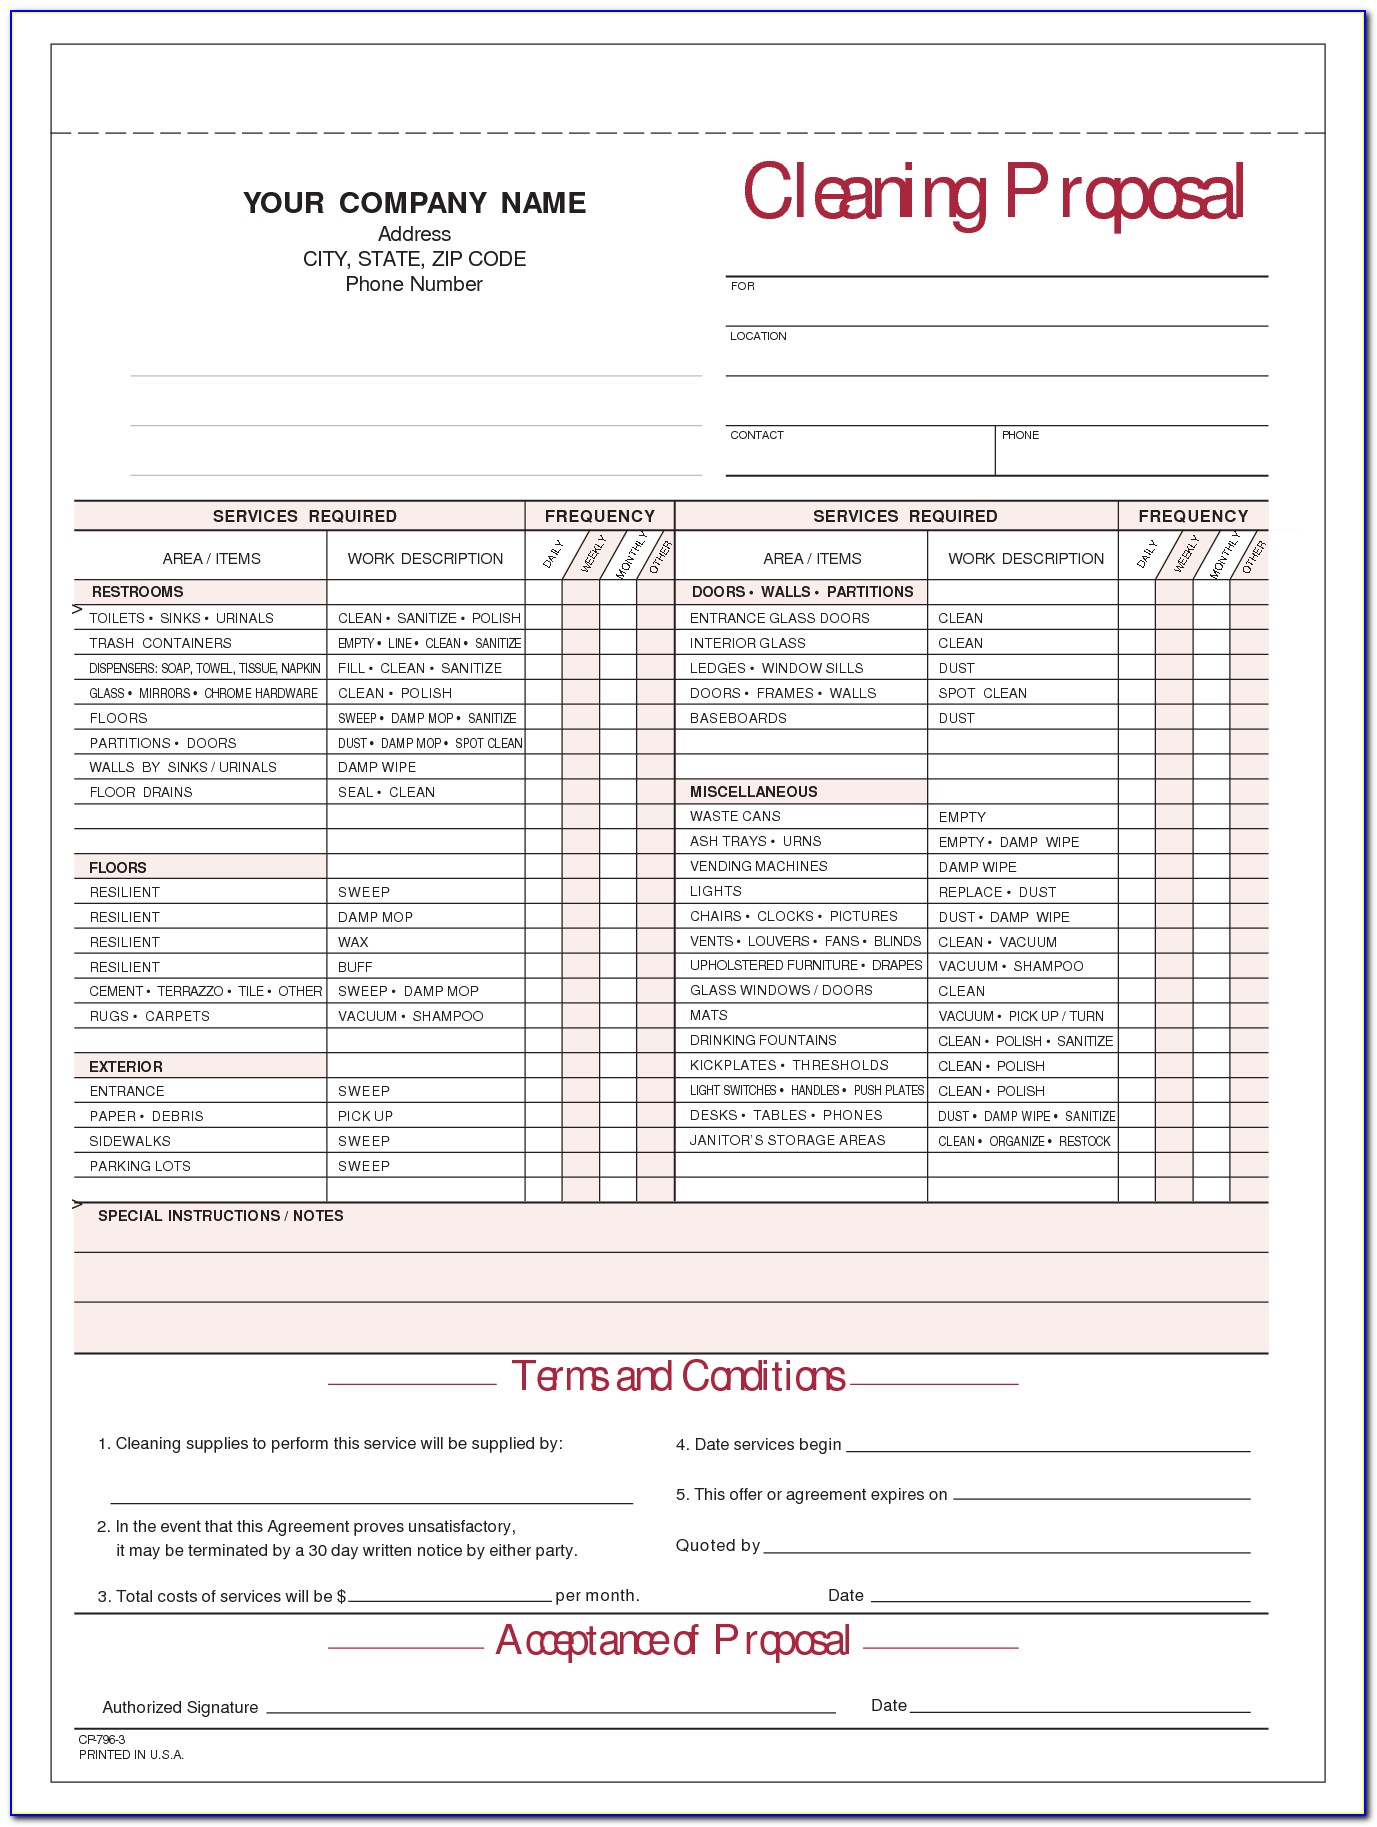 Free Cleaning Bid Forms